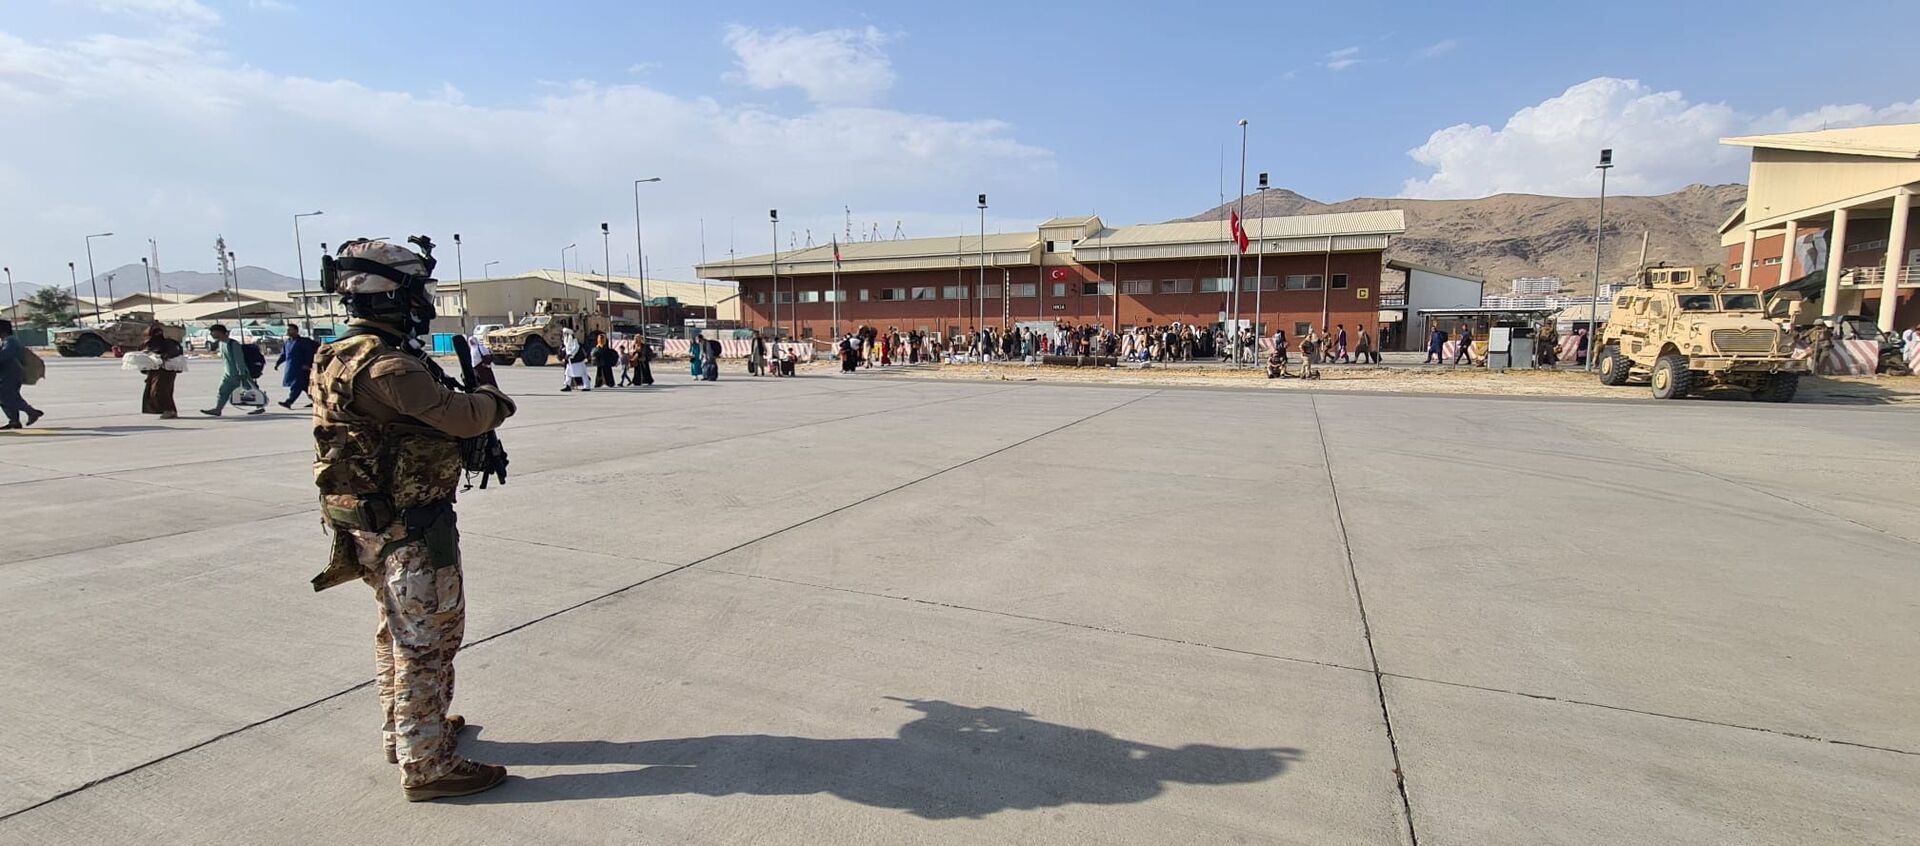 Afghan evacuees queue before boarding Italy's military aircraft C130J during the evacuation at Kabul's airport, Afghanistan, August 22, 2021. Italian Ministry of Defence/Handout via REUTERS - Sputnik International, 1920